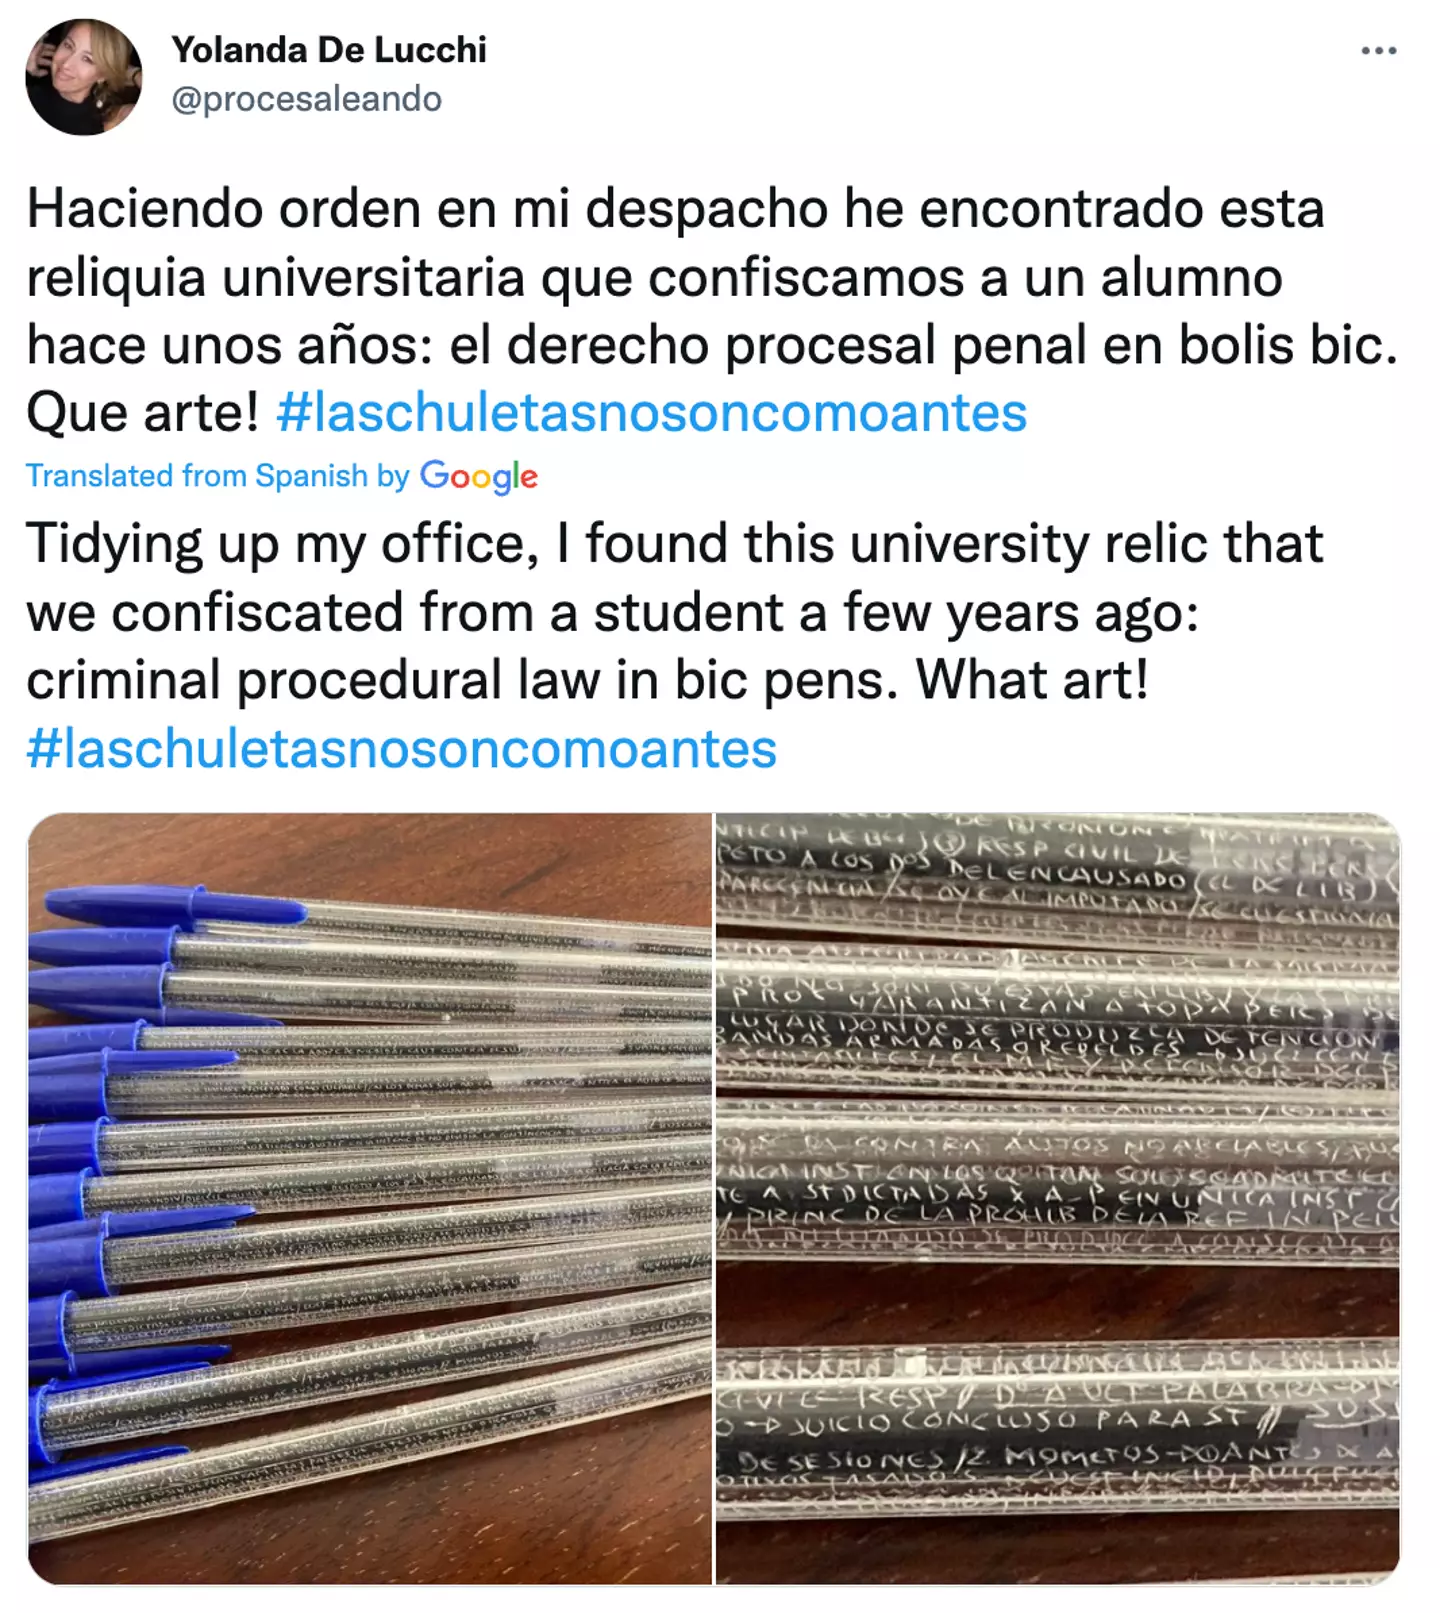 The student had their impressive pens confiscated from them.